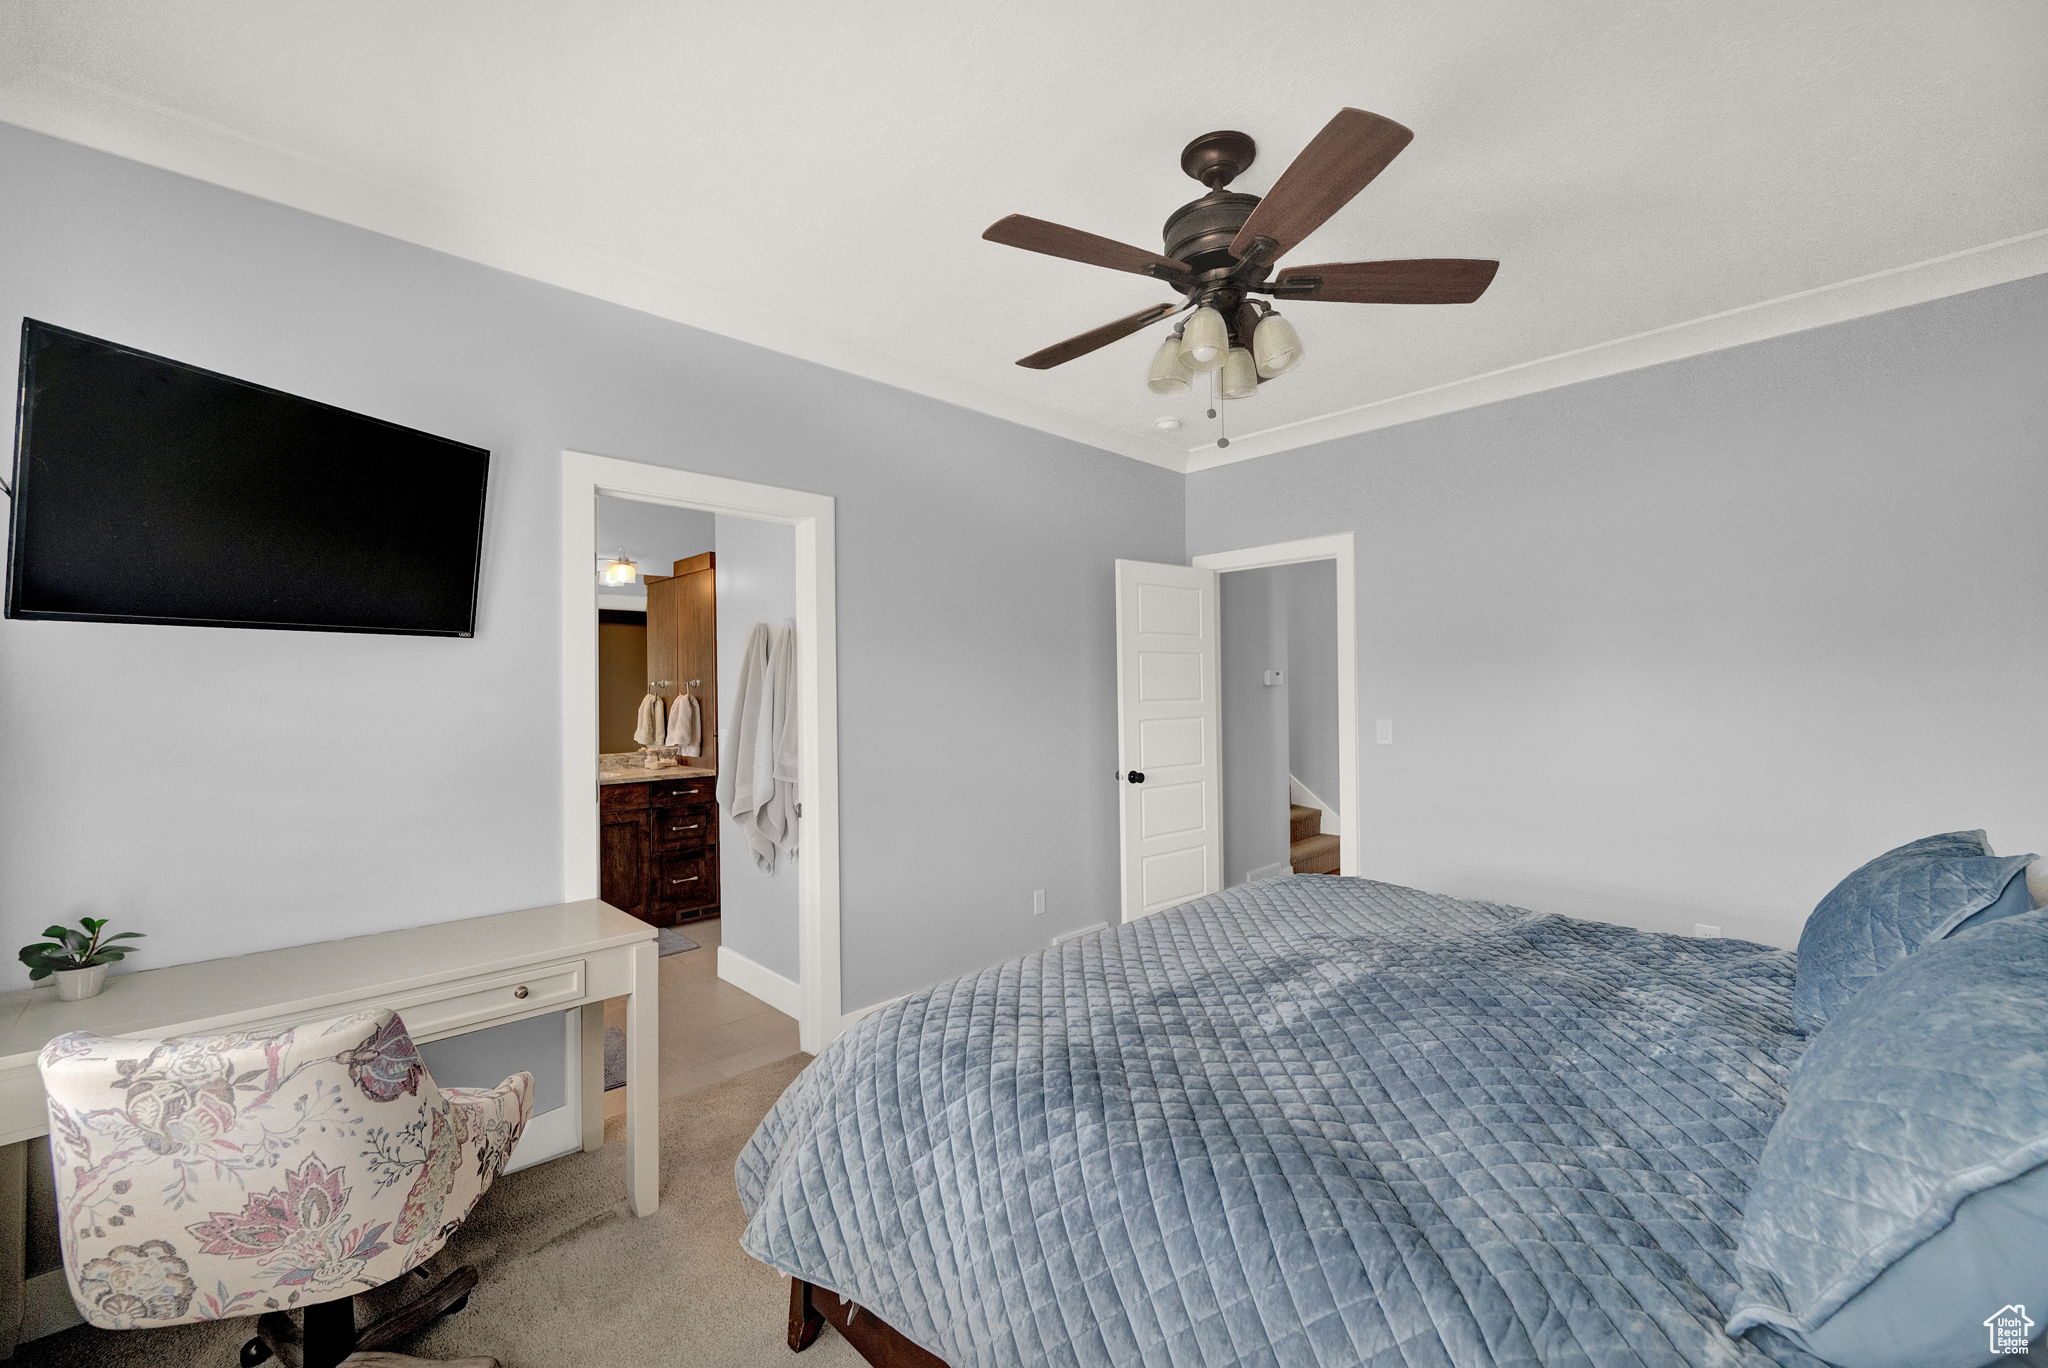 Carpeted bedroom with crown molding, ceiling fan, and ensuite bathroom